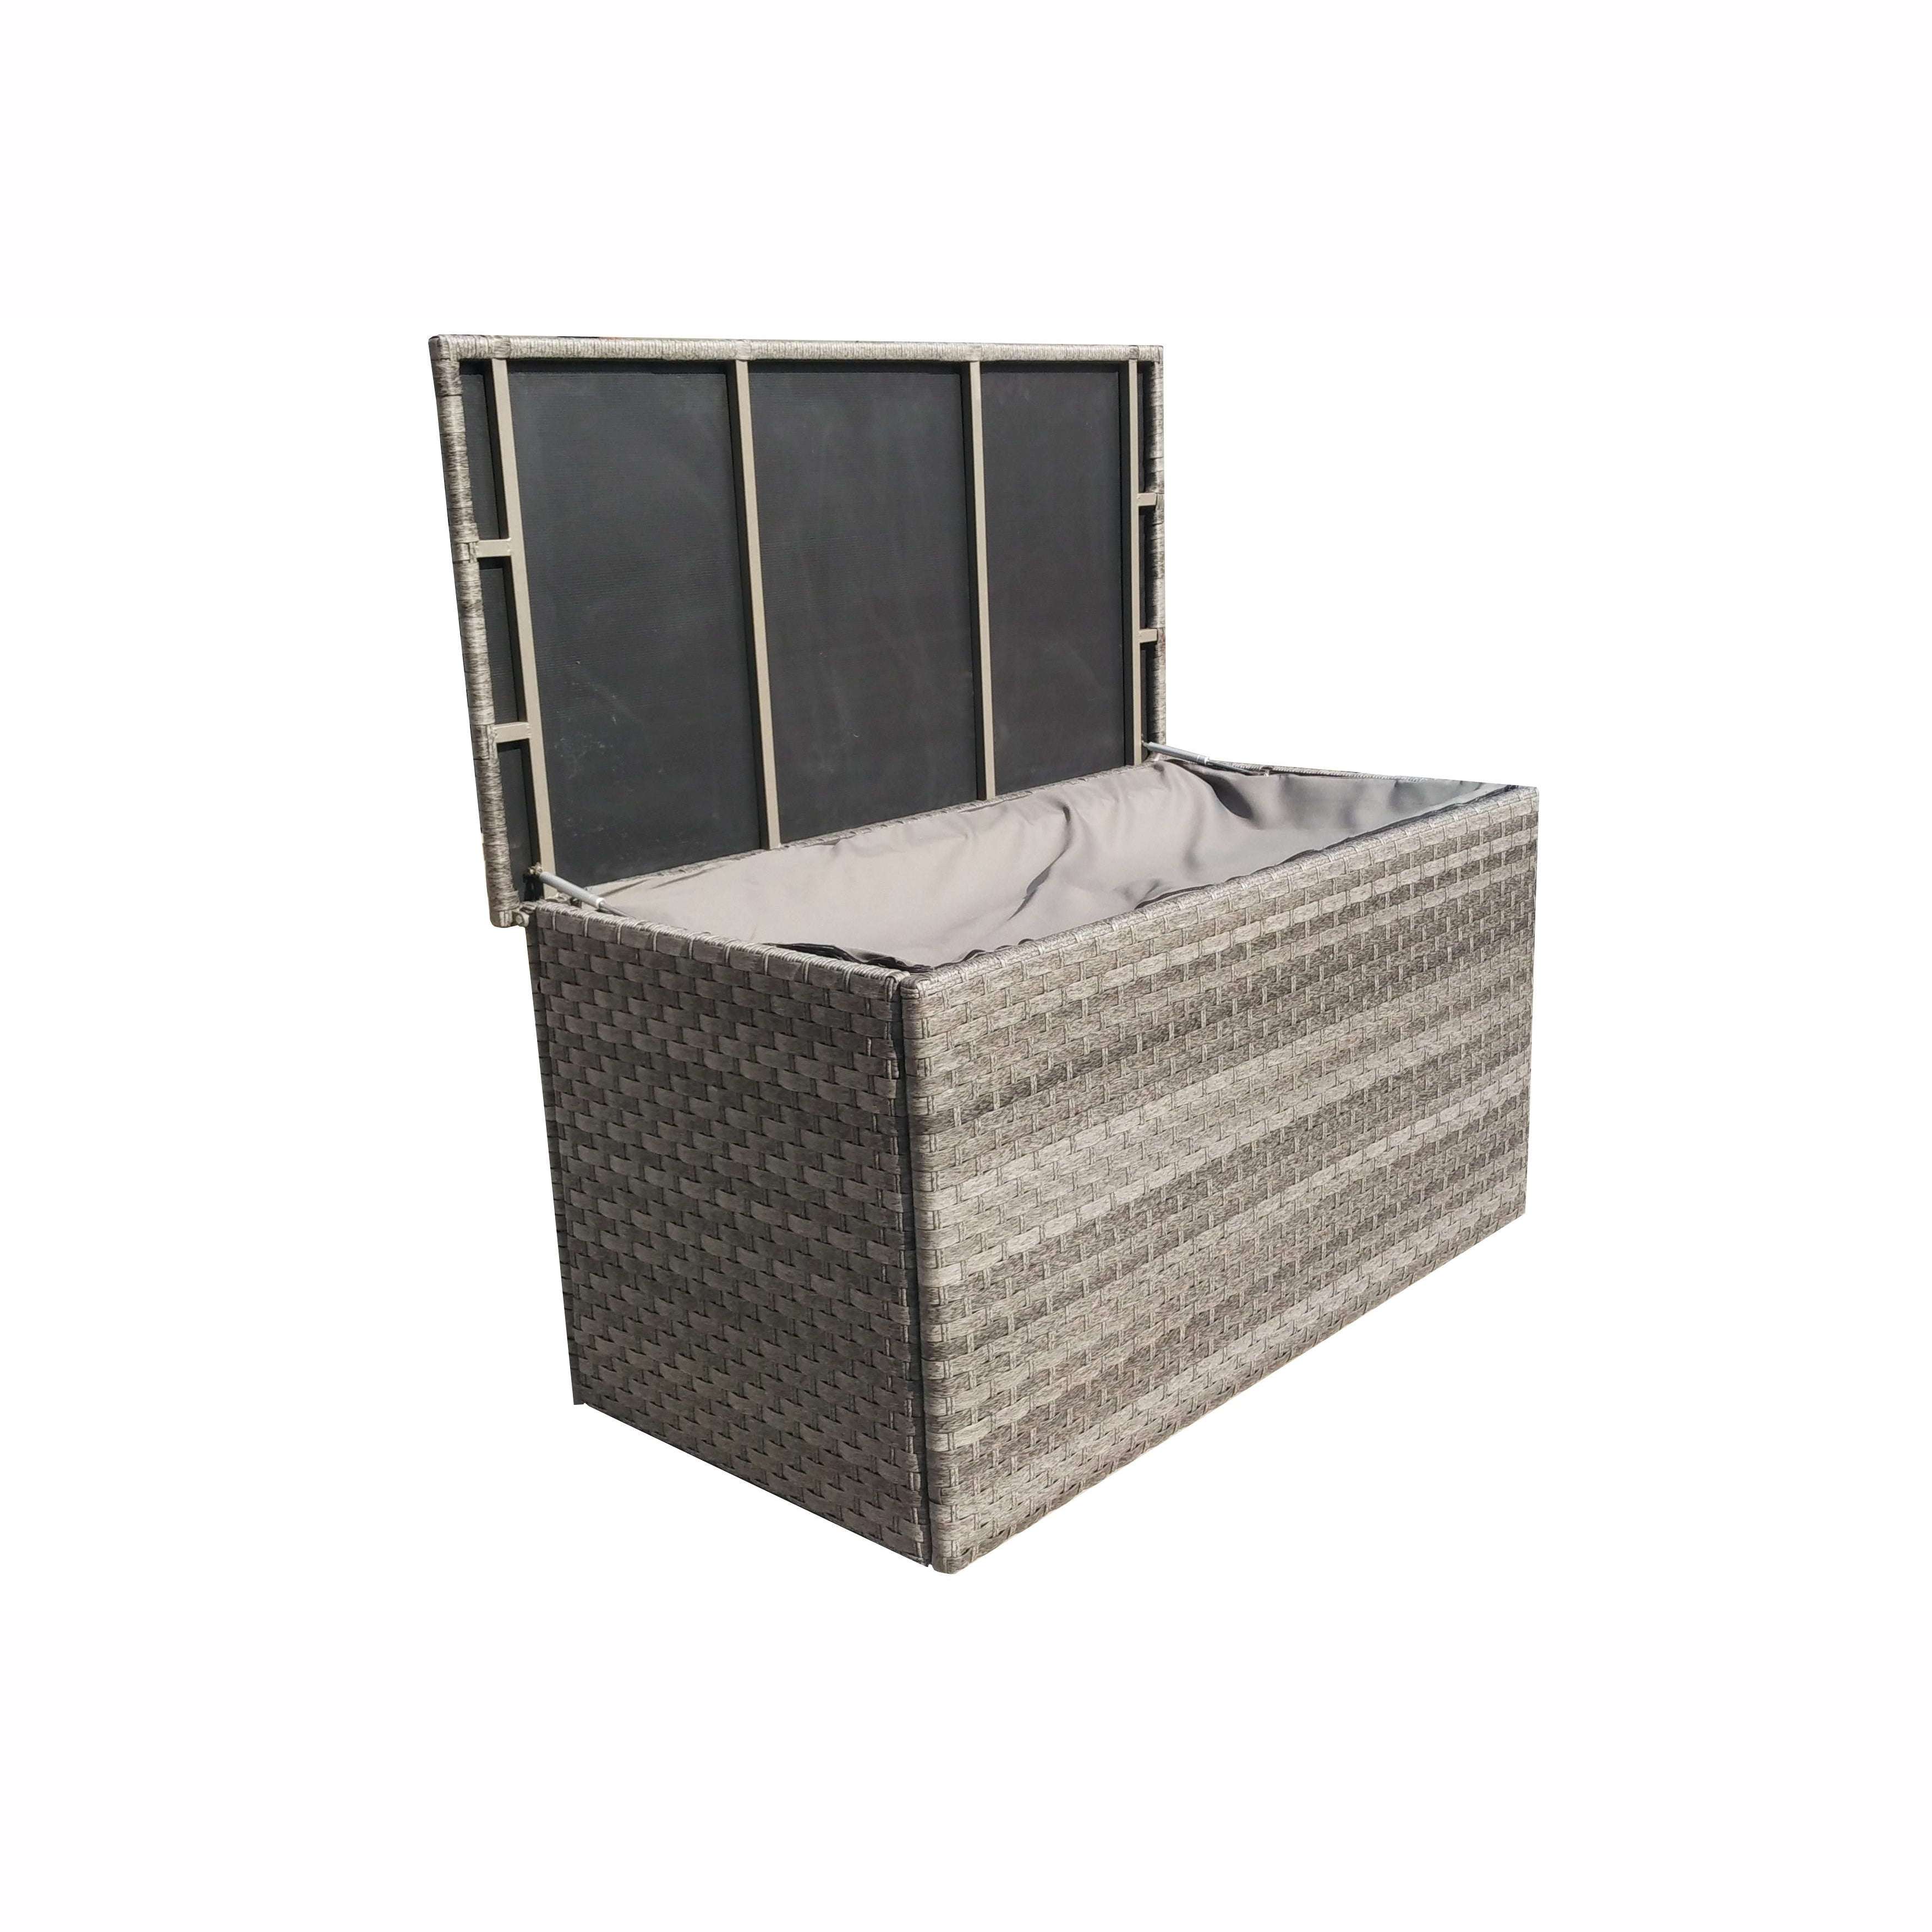 Exceptional Garden:Signature Weave Cushion Box Large